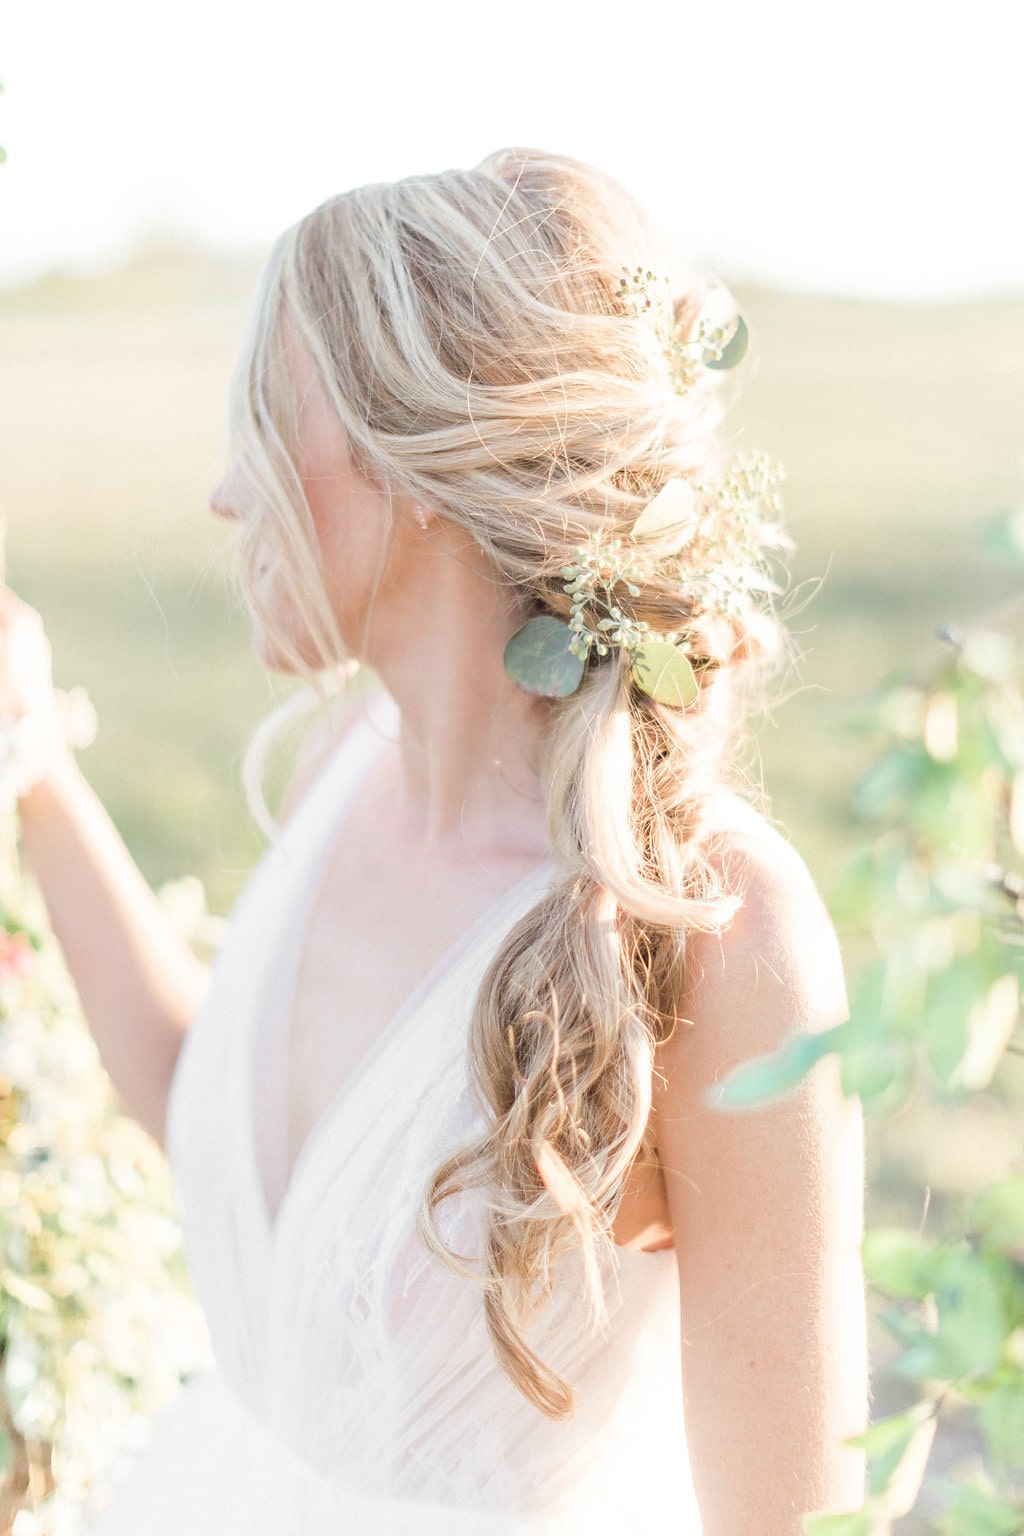 Be Sure To Wear Flowers In Your Hair: Nature Inspired Hairstyles